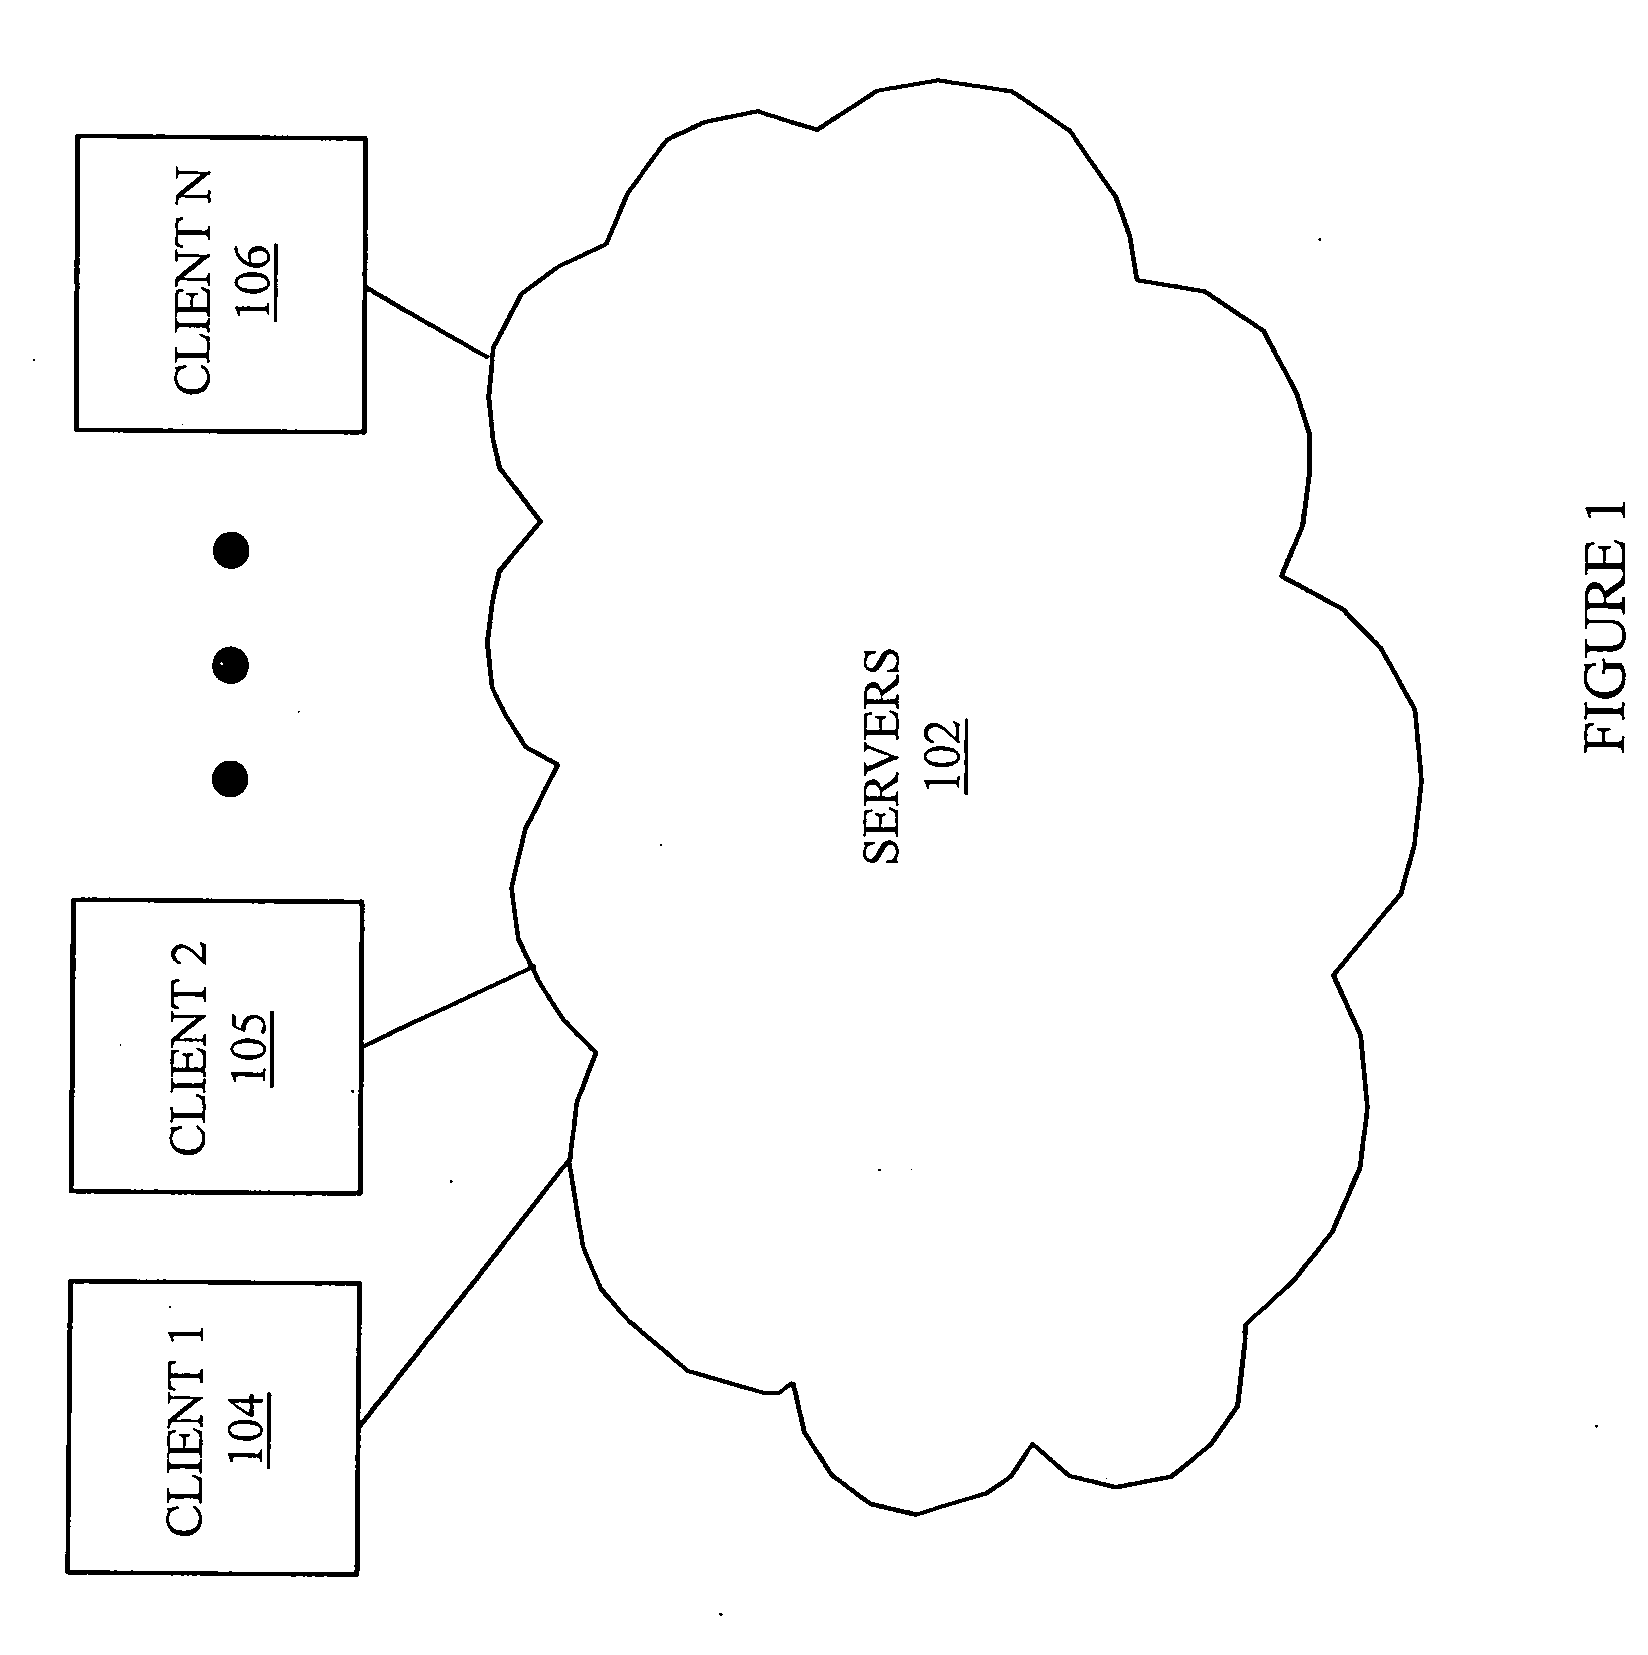 Managing file objects in a data storage system